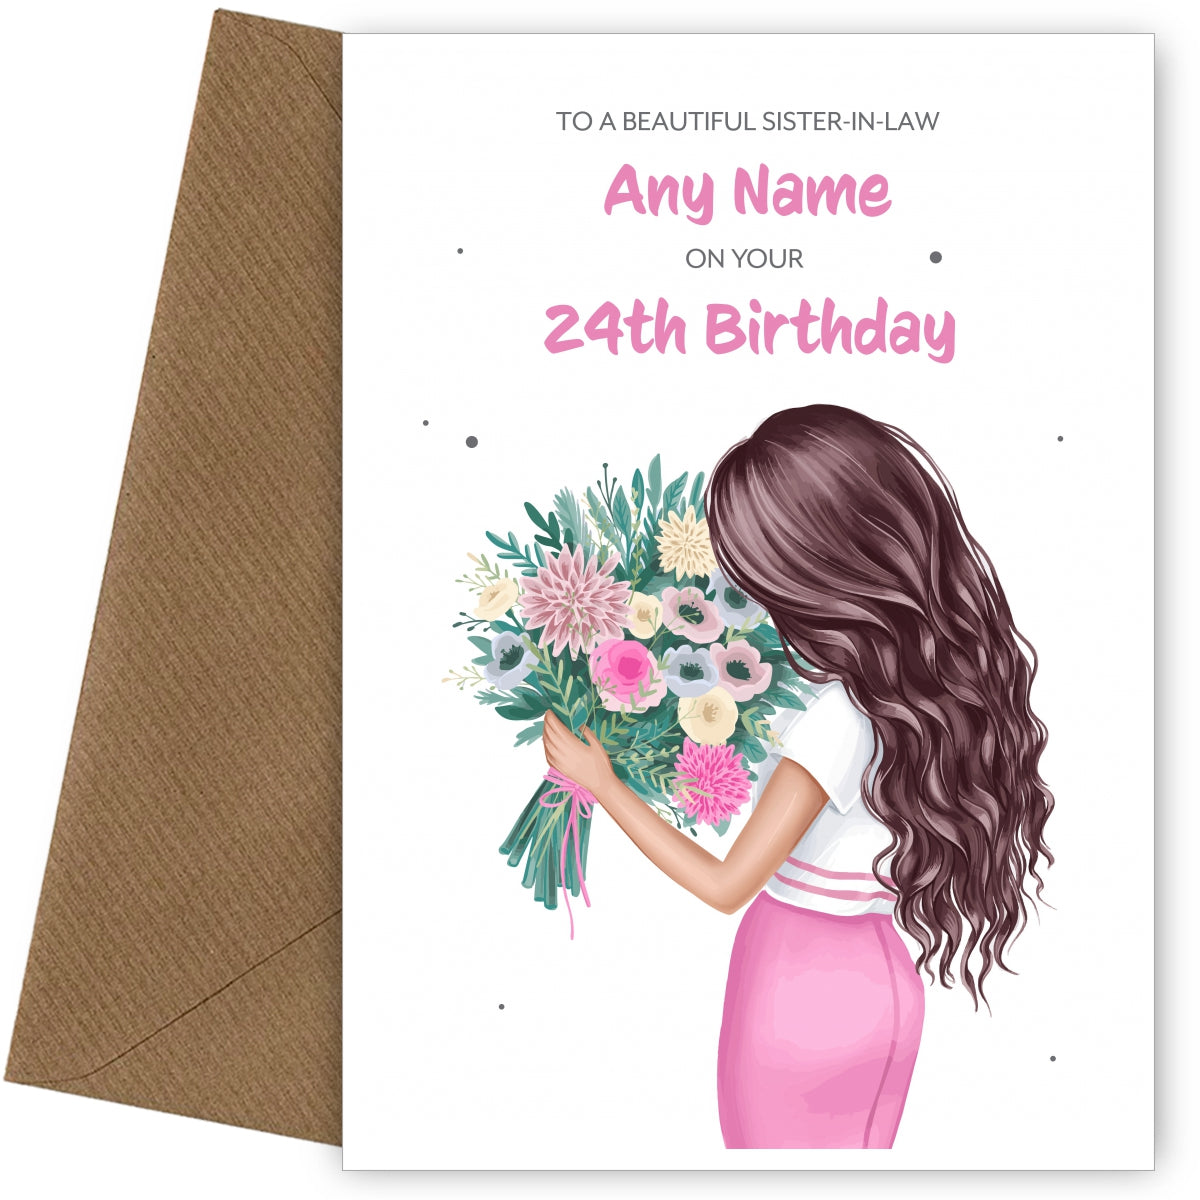 24th Birthday Card for Sister-in-law - Beautiful Brunette